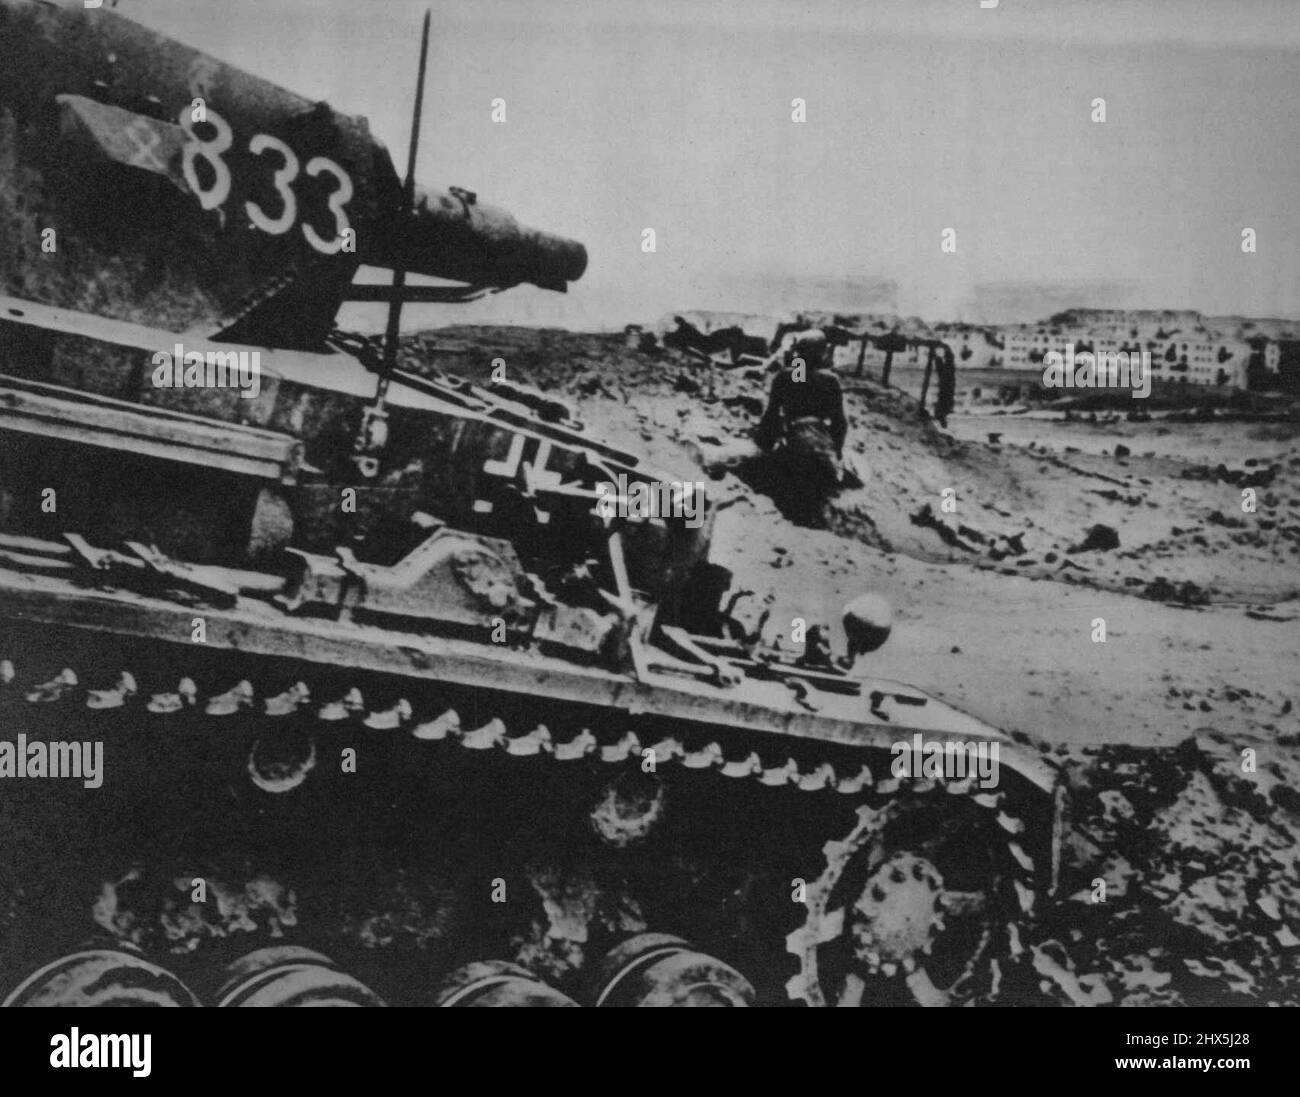 Pointing Toward Stalingrad -- The gun on this Nazi tank toward Stalingrad as the armored vehicle supported an advance German infantry against Soviet fortifications in the Volga industrial city, according to the caption accompanying this German photo ***** reached New York from neutral Portugal. December 5, 1942. (Photo by AP Wirephoto). Stock Photo